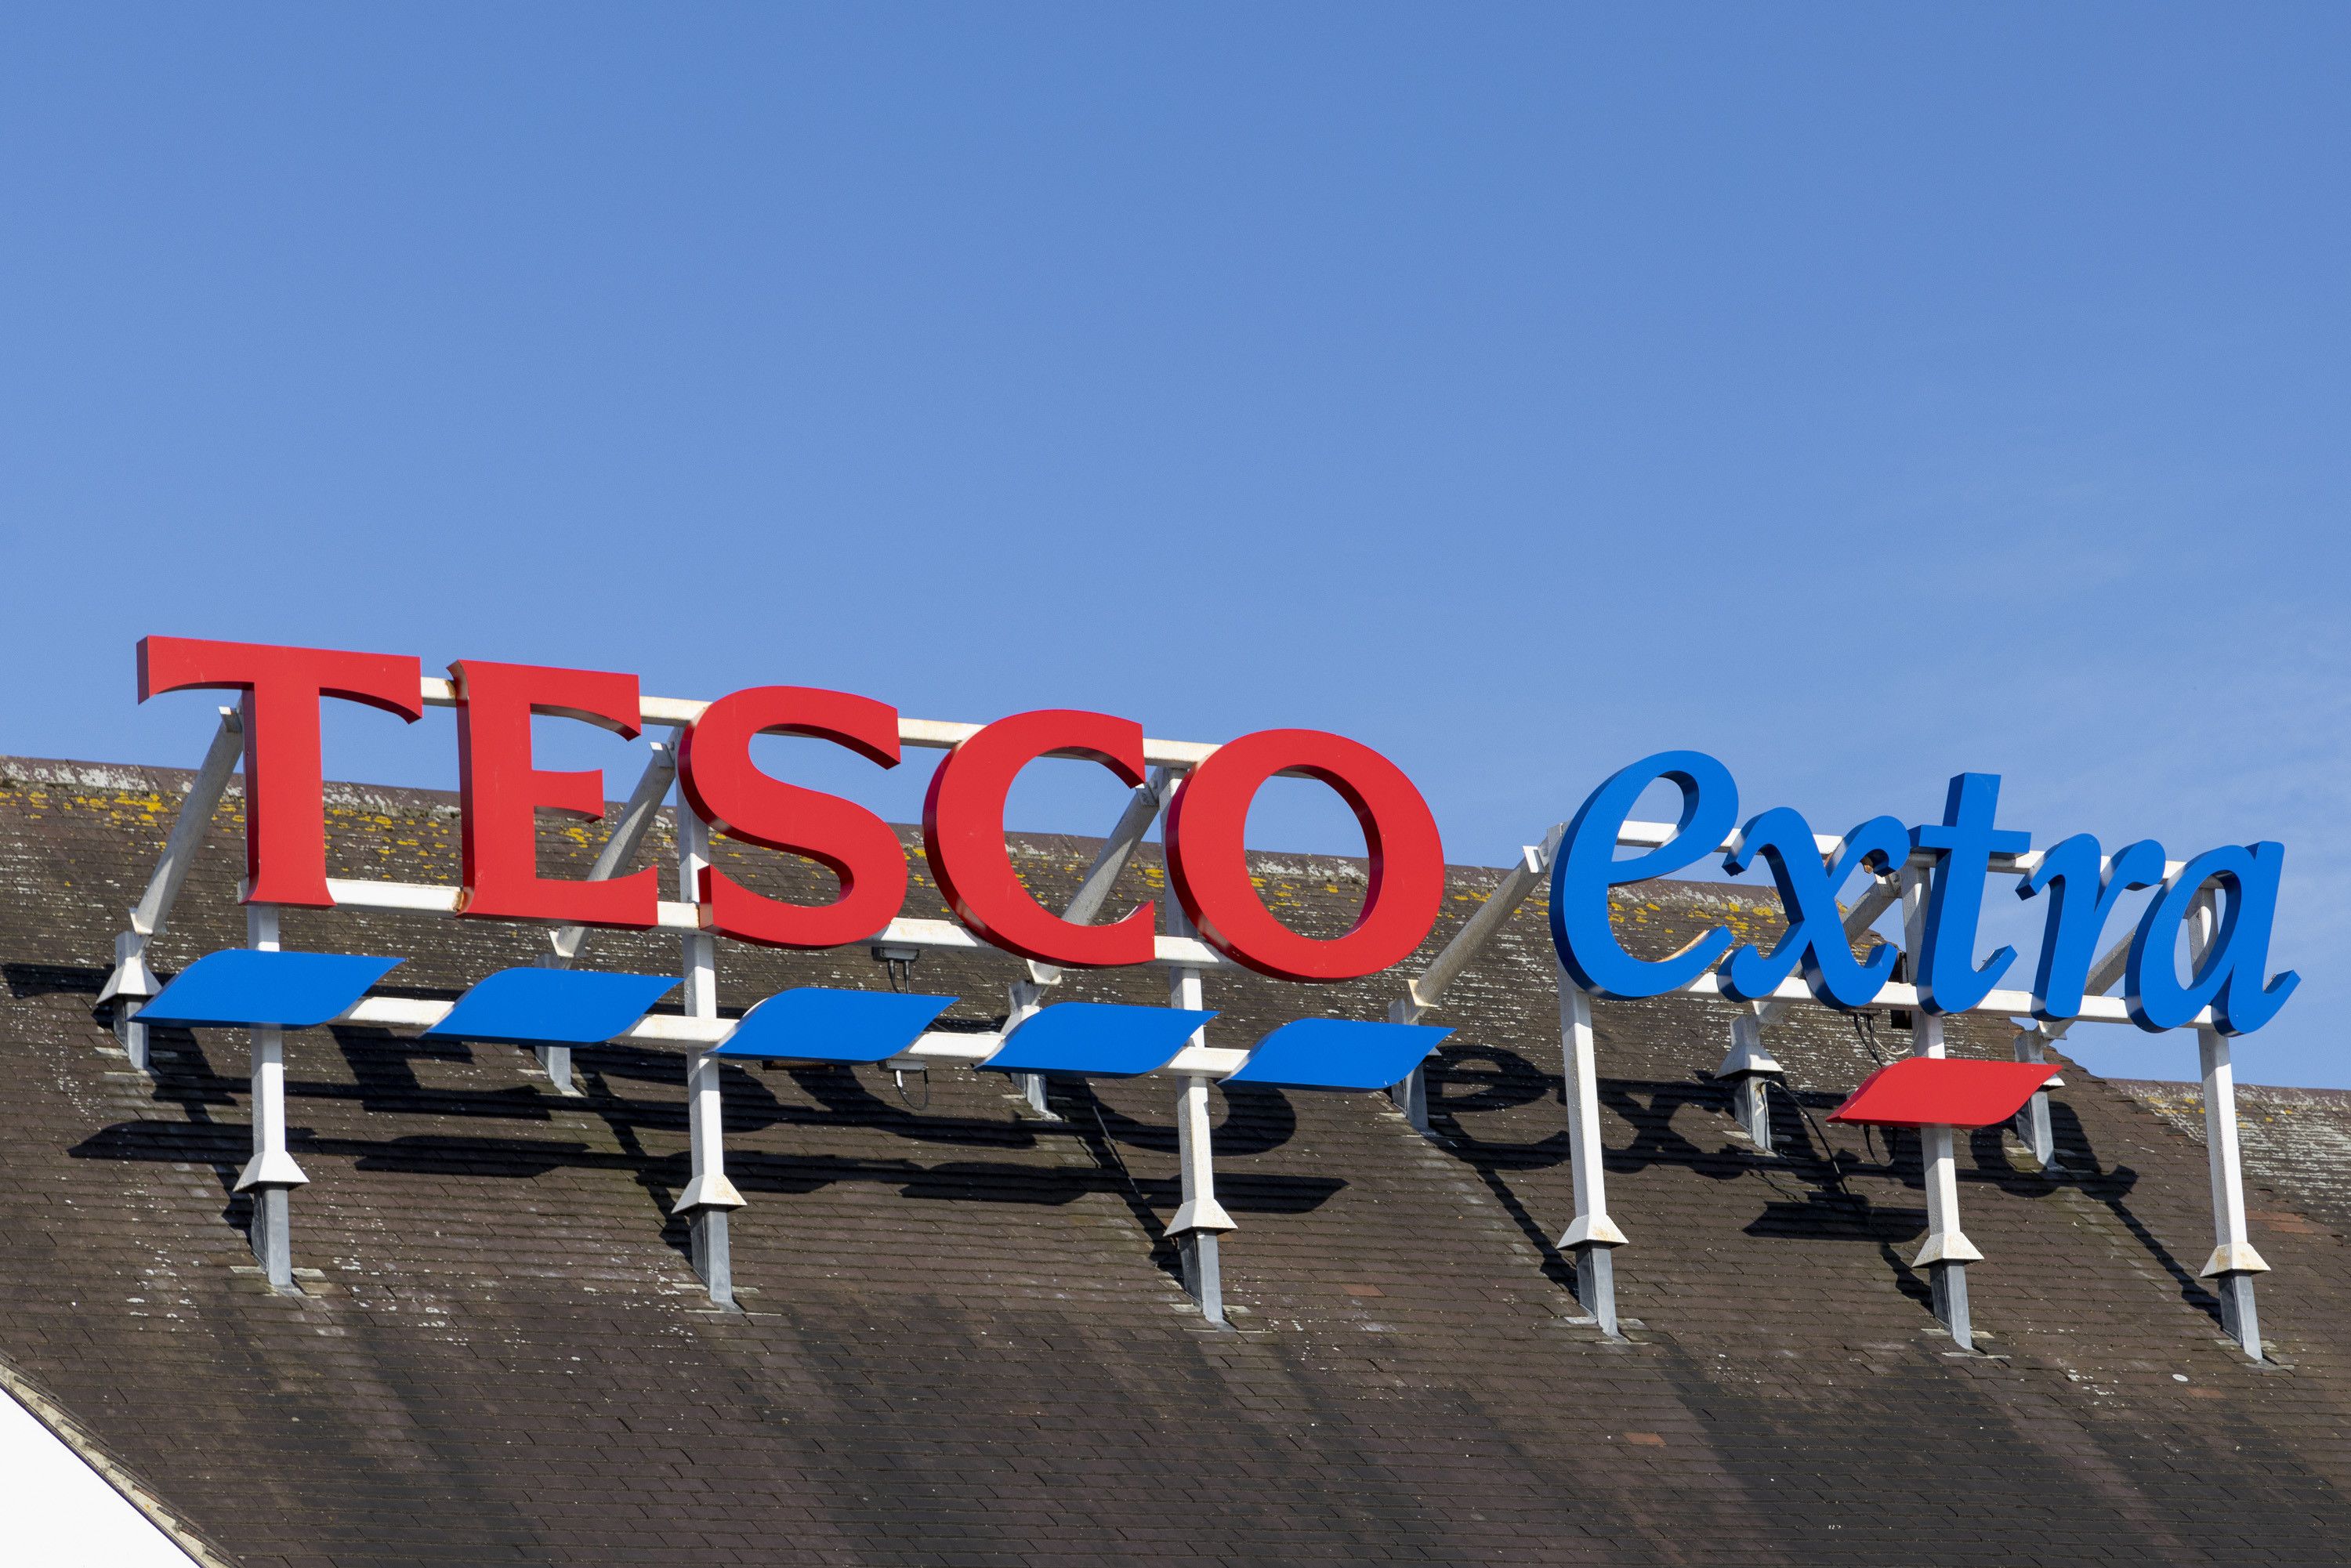 Pearce work closely with Tesco's UK design team  to deliver signs that meet their exacting corporate brand guidelines.